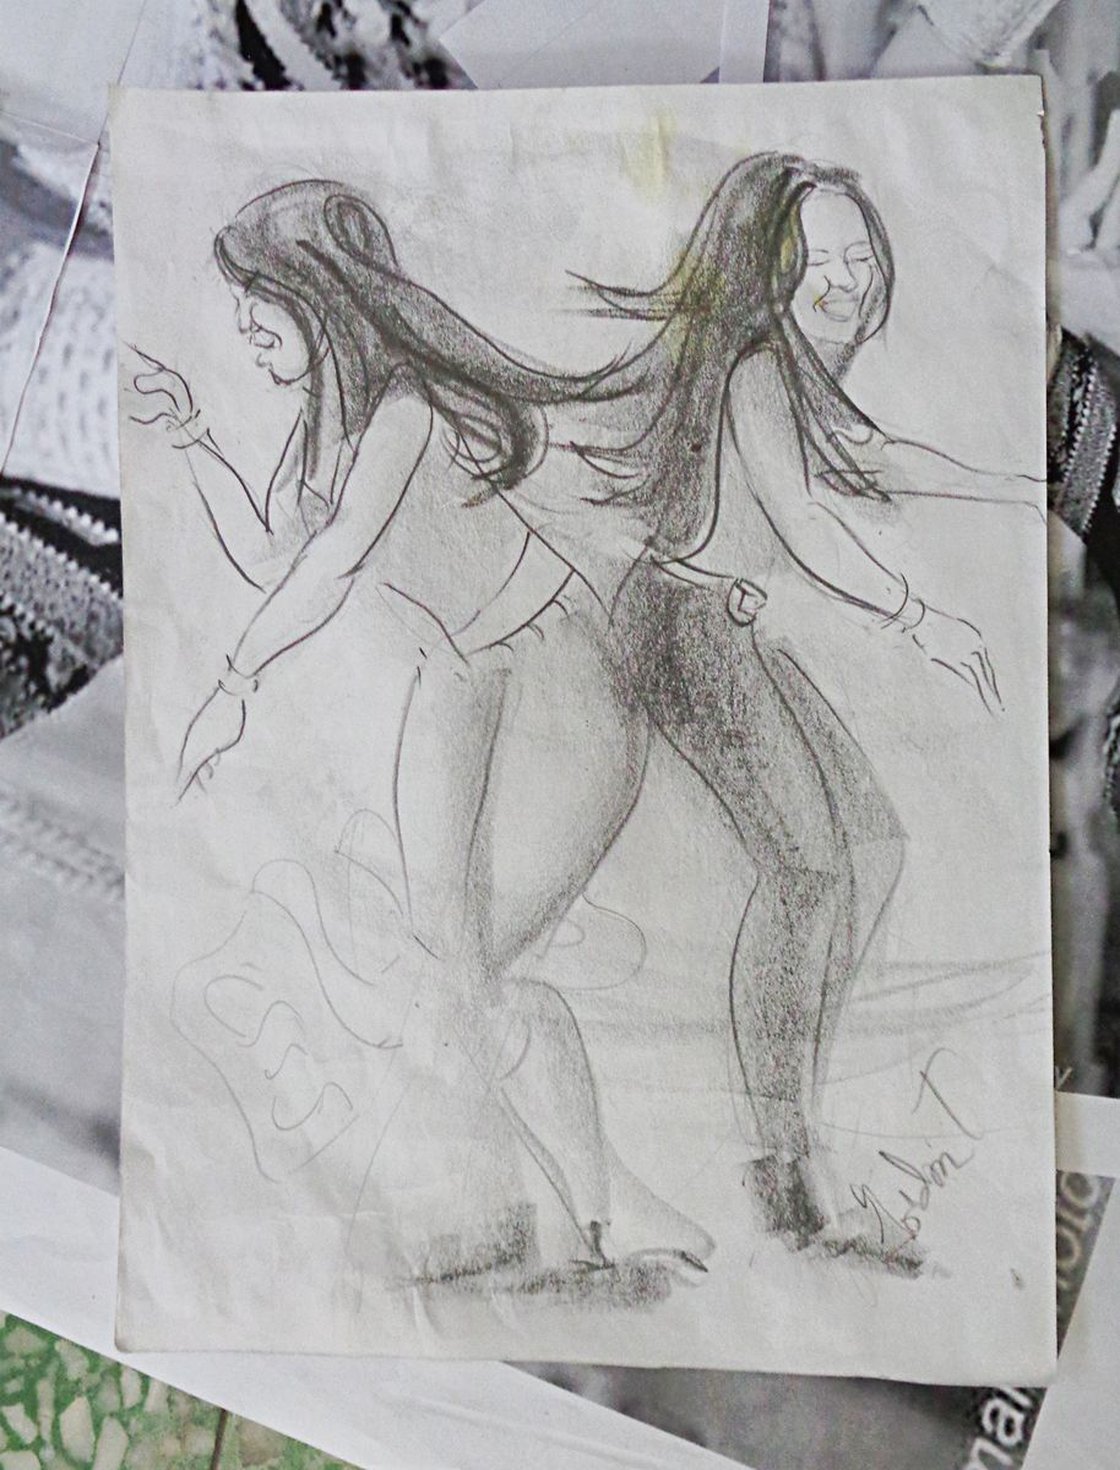 Baggy Pants (Untitled), Drawing by Gordonartist1